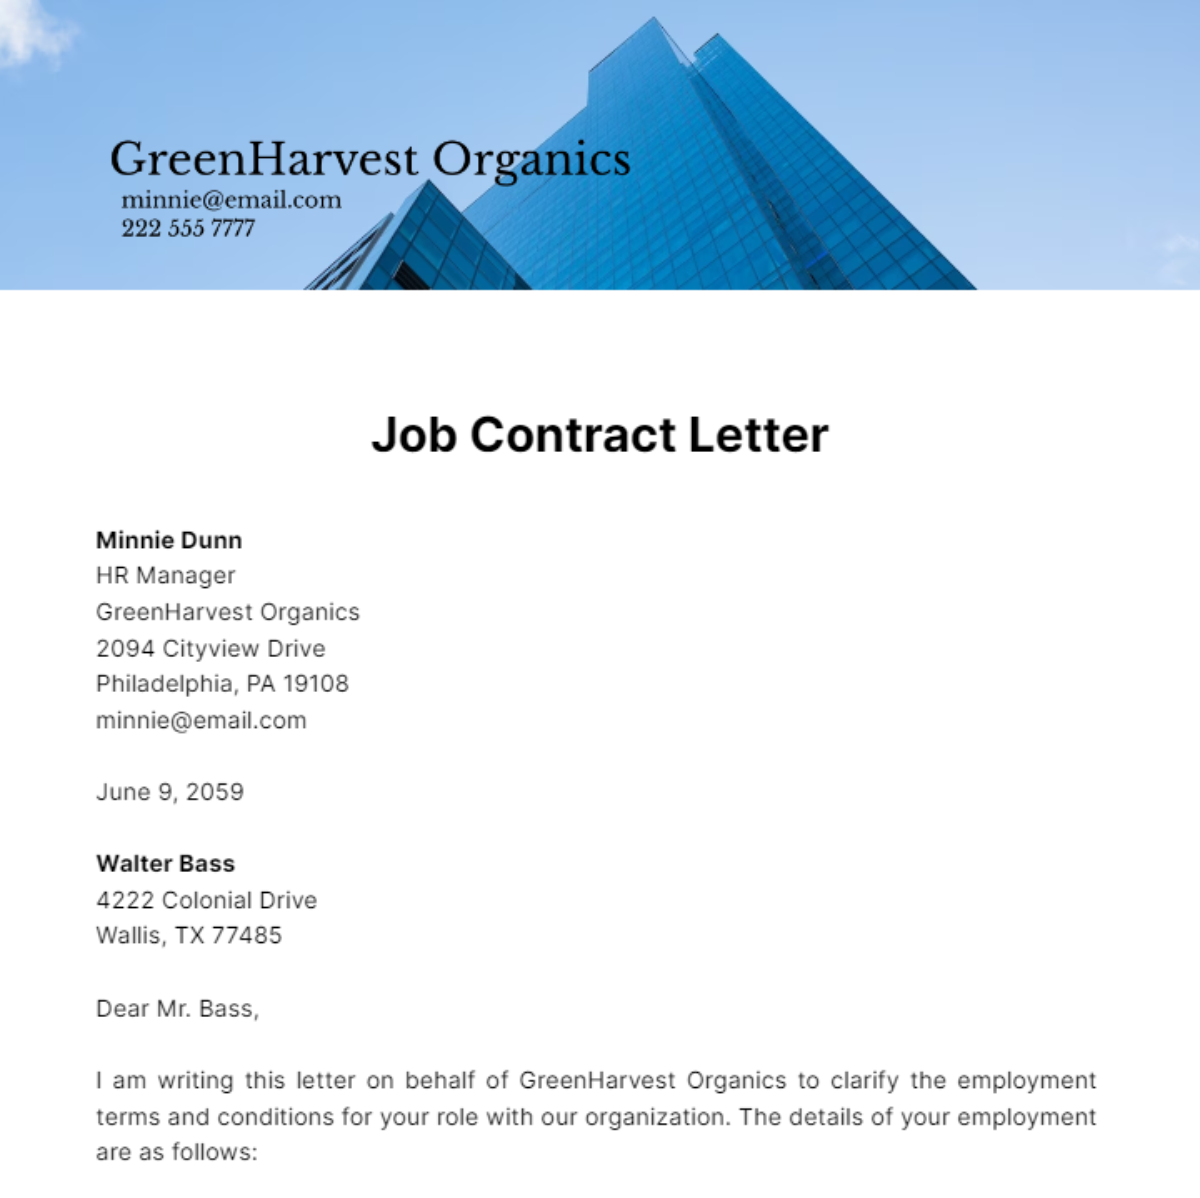 Job Contract Letter Template